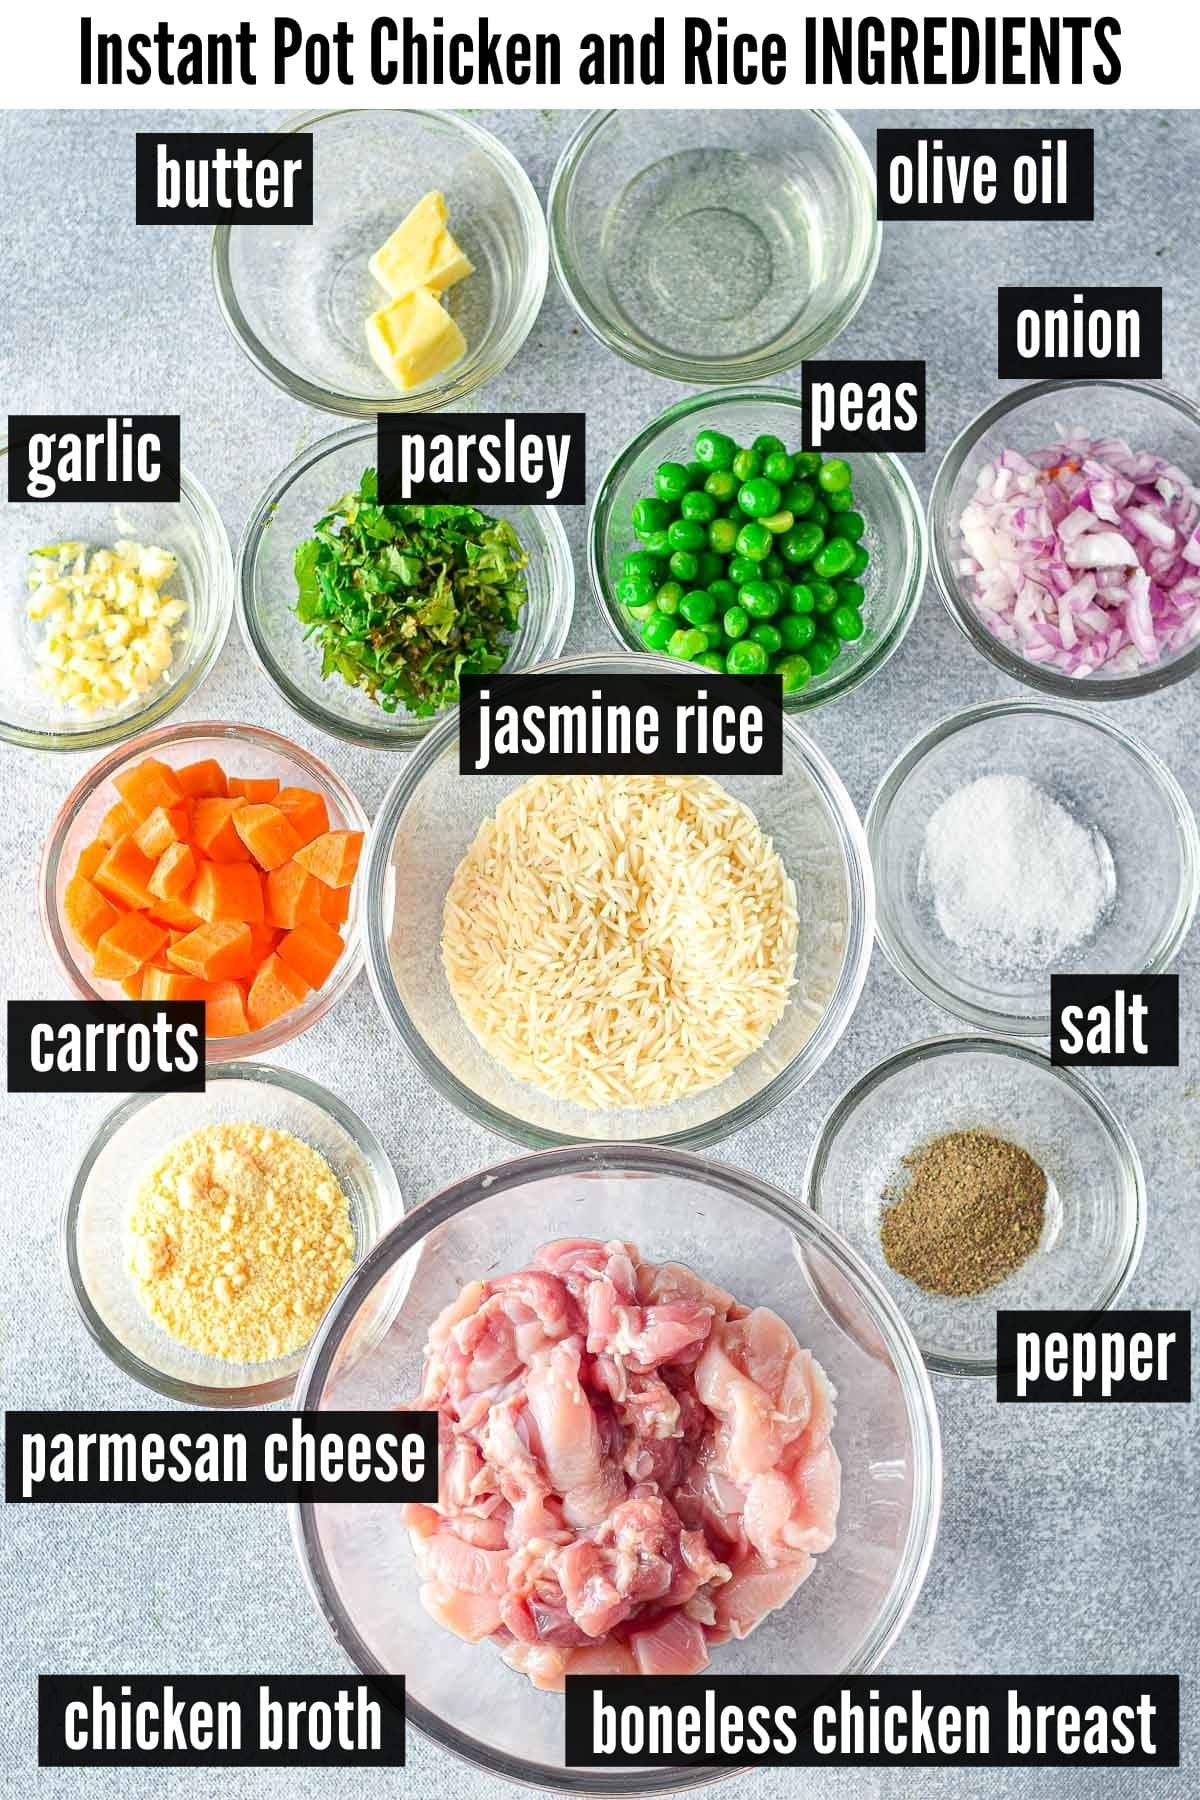 instant pot chicken and rice labelled ingredients